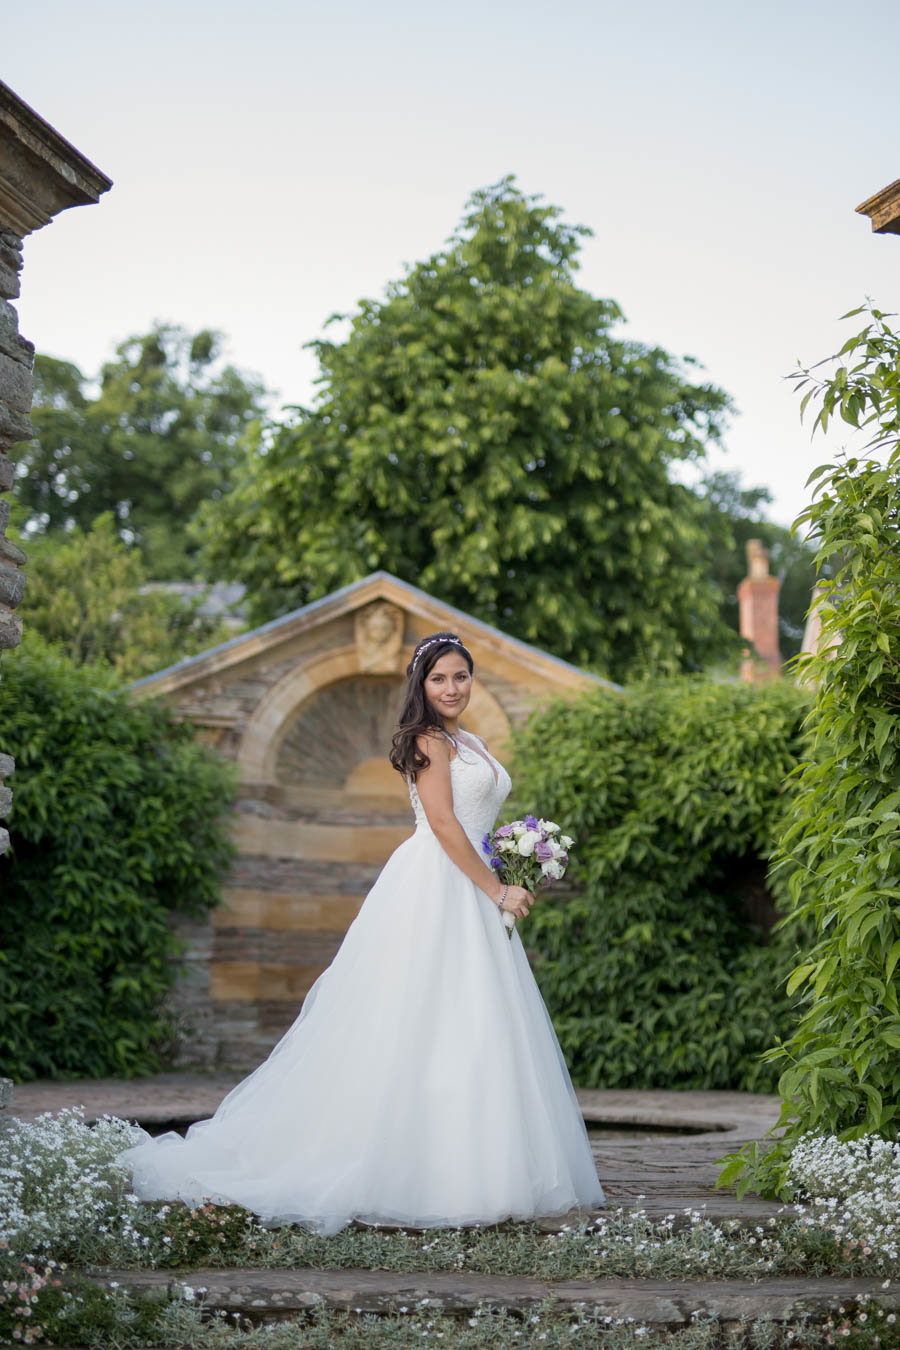 Bridal photo on steps at Hestercombe Gardens